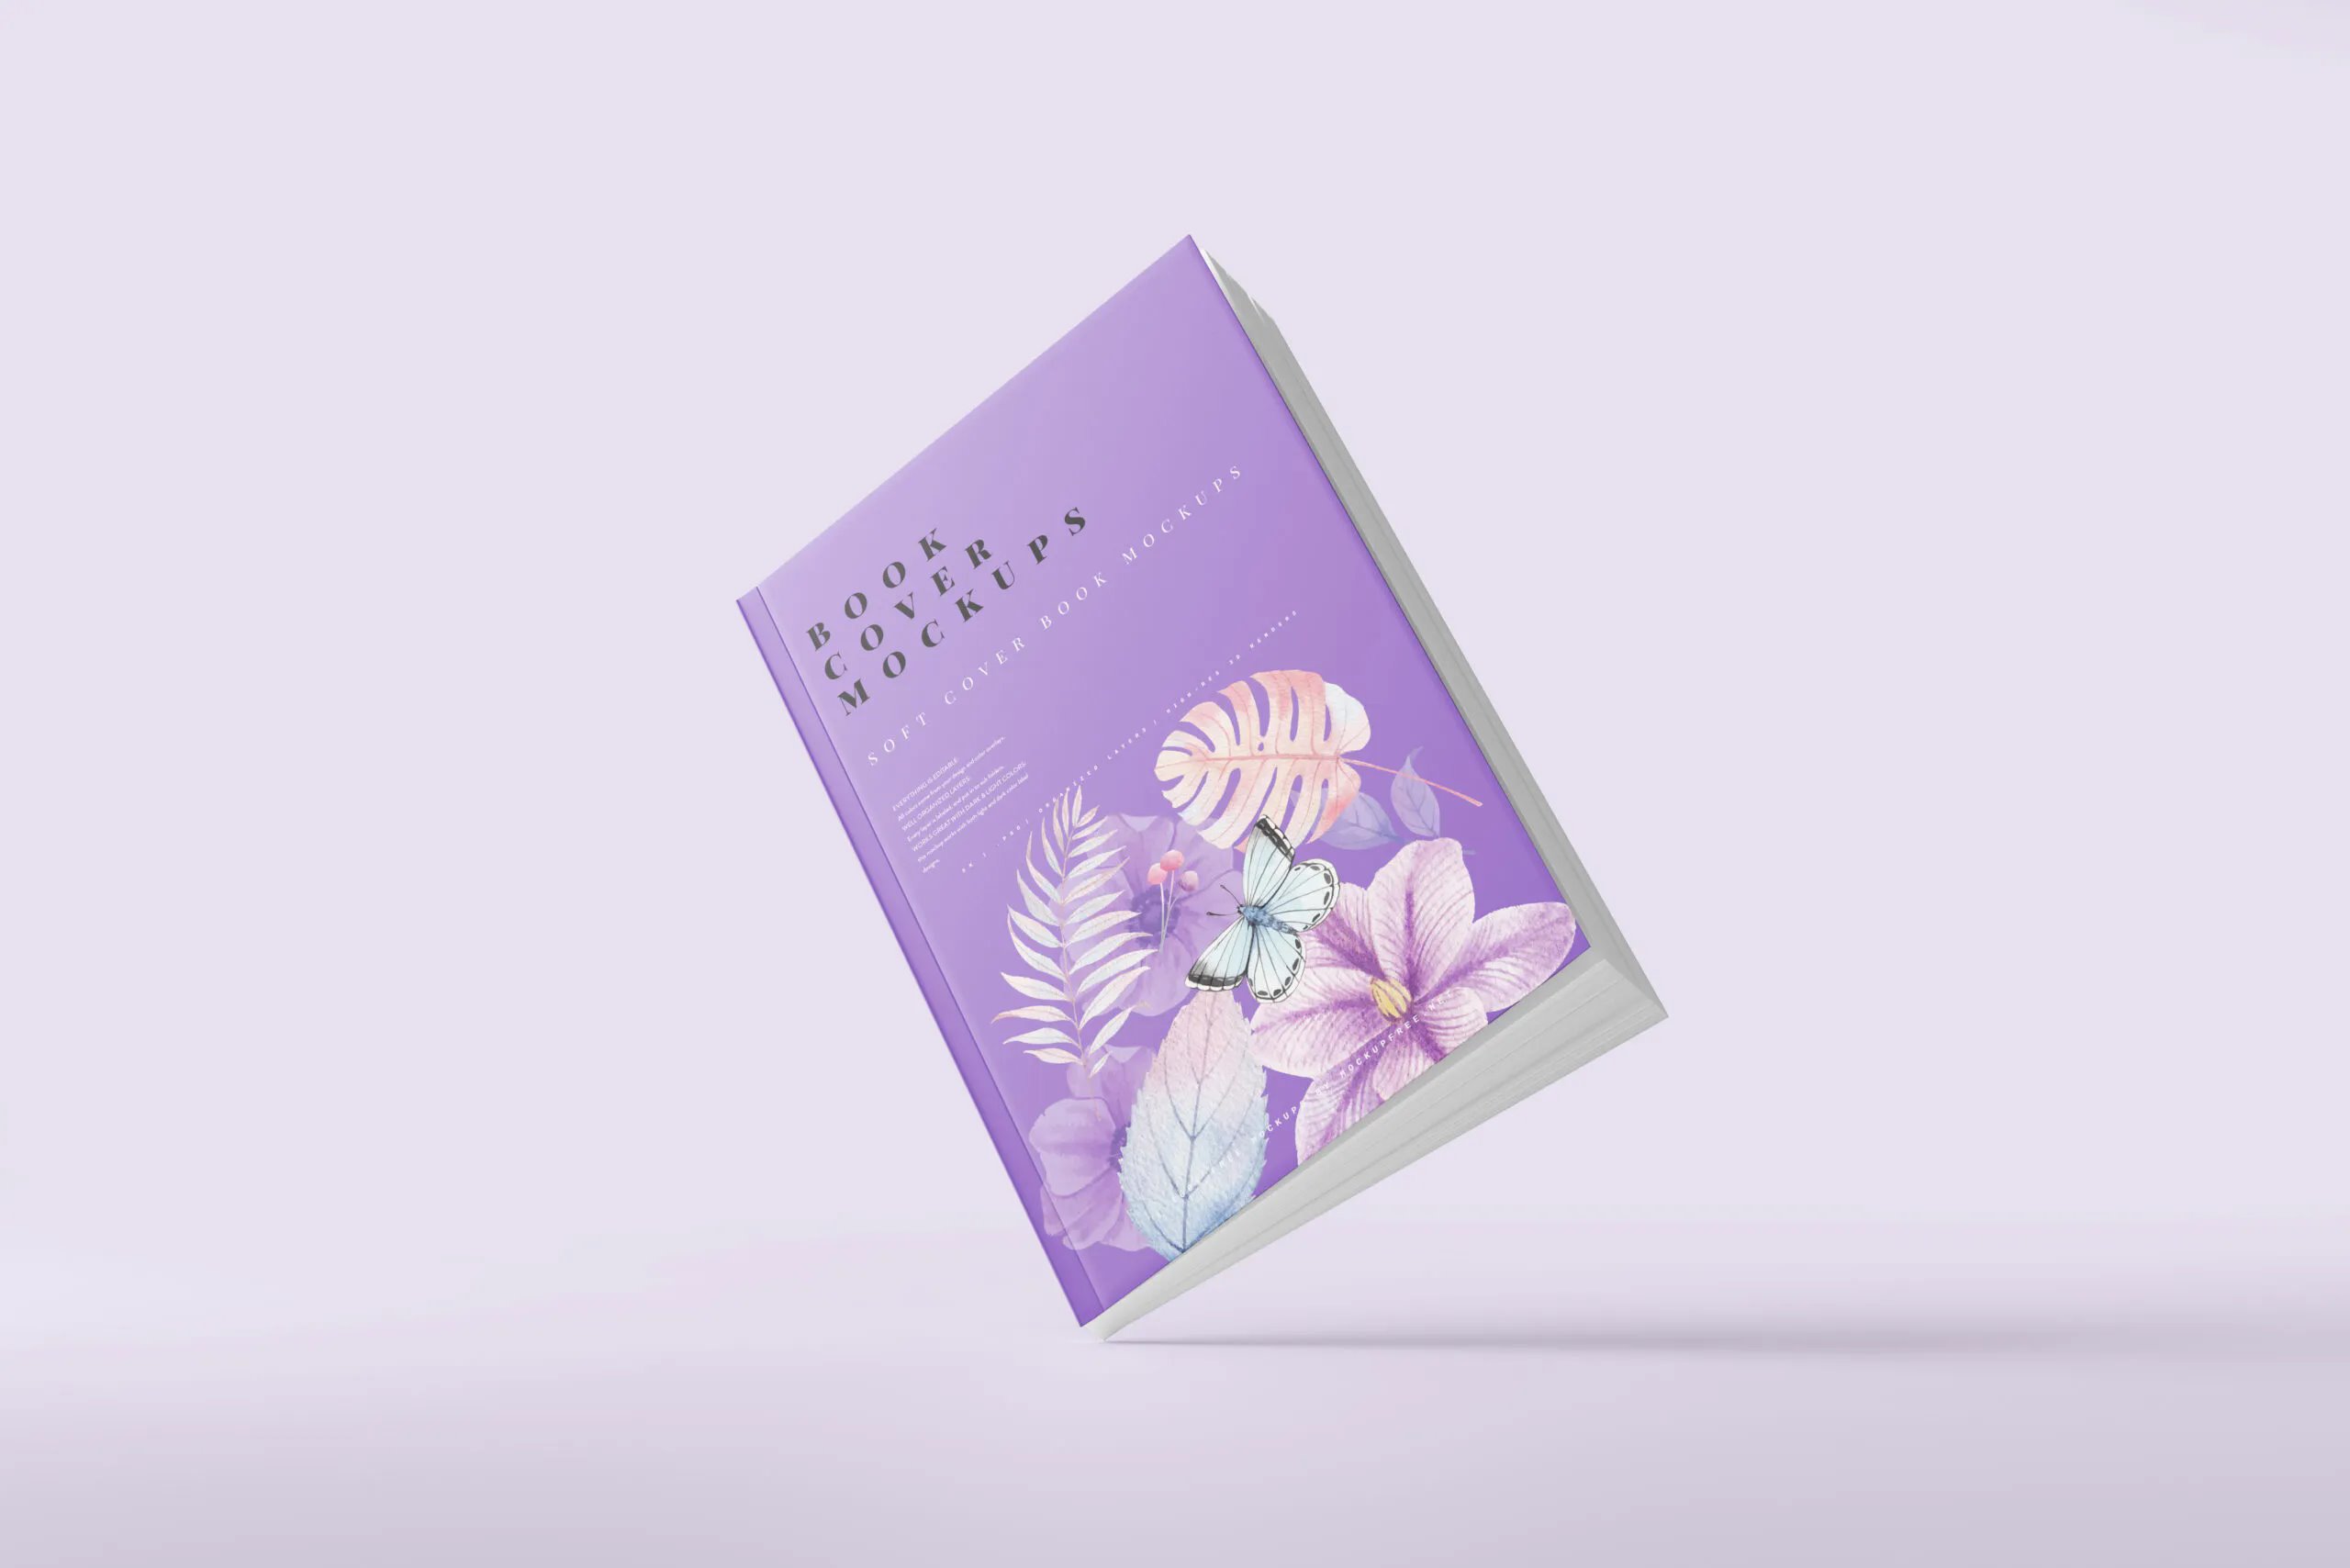 6 Soft Cover Book Mockup in Varied Visions FREE PSD